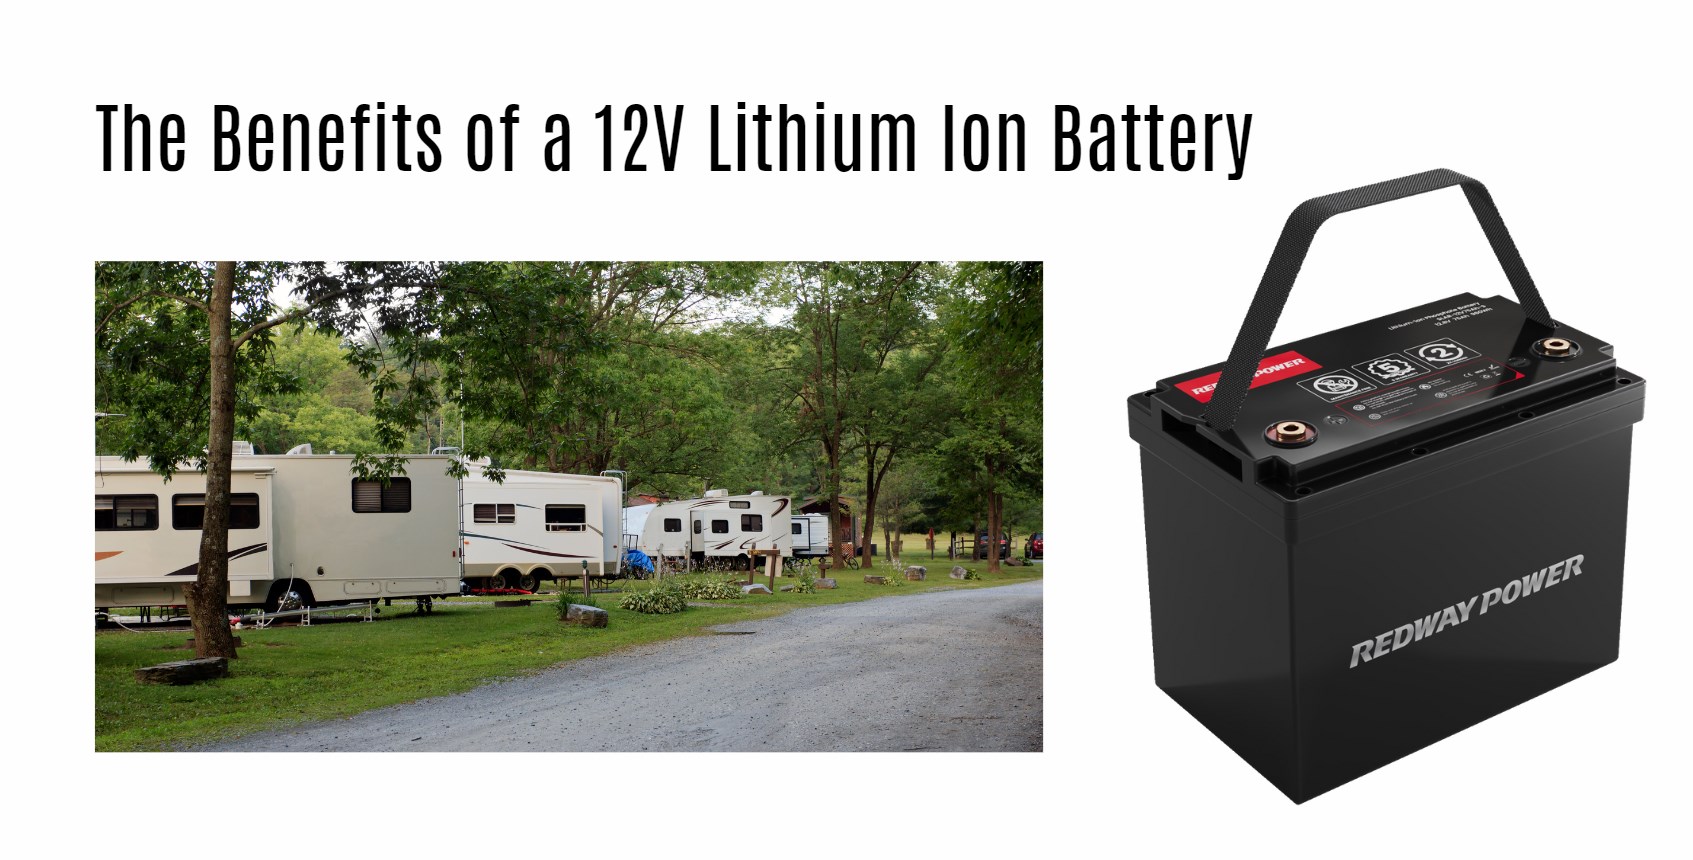 The Benefits of a 12V Lithium Ion Battery. 12v 100ah rv lithium battery factory oem manufacturer marine boat